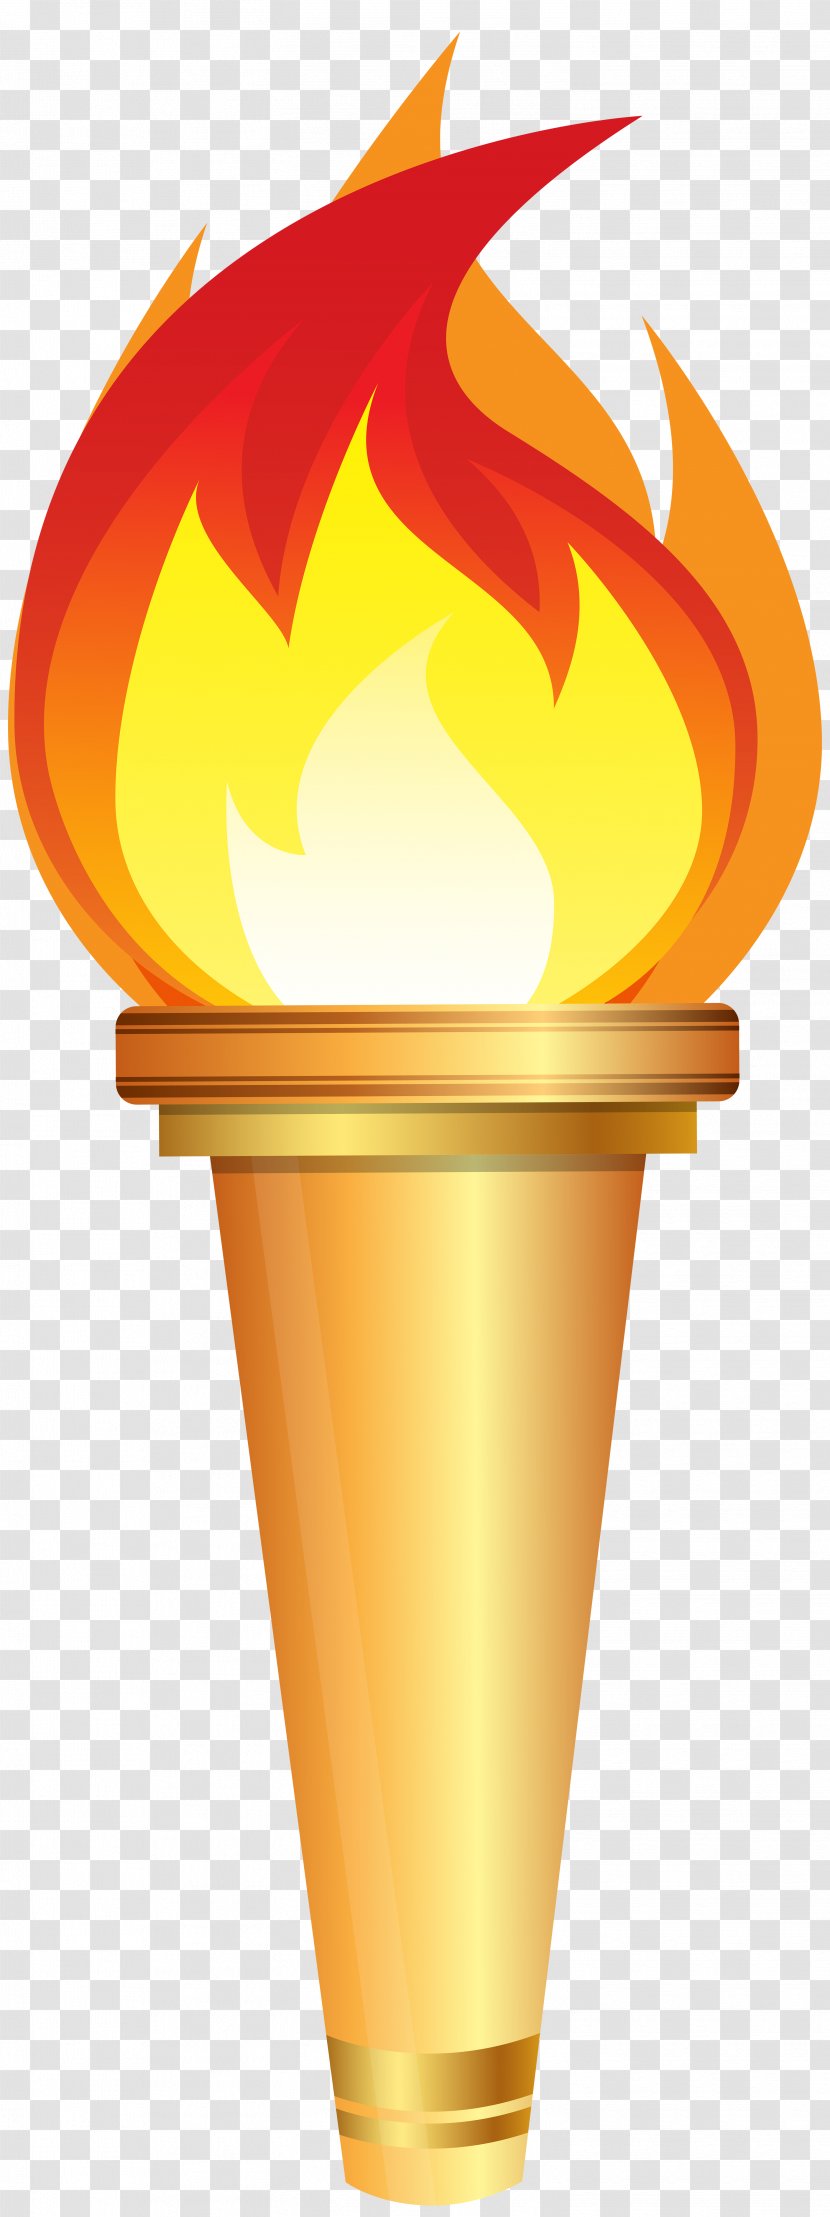 2018 Winter Olympics Torch Relay Olympic Games 2016 Summer Clip Art - Ice Cream Cone - Flame Transparent PNG